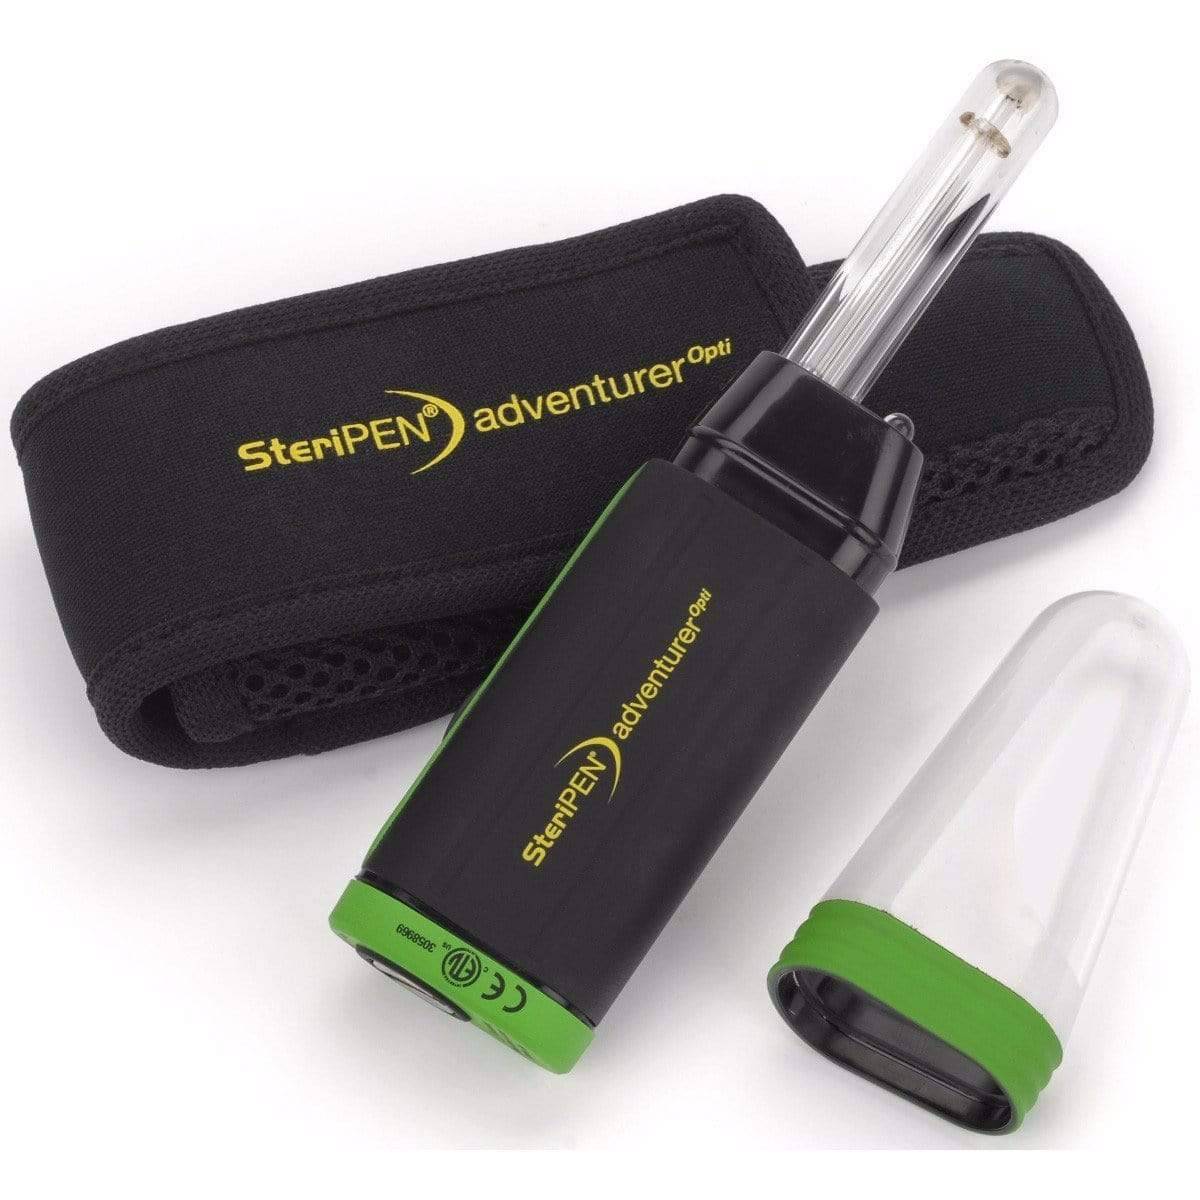 SteriPEN Adventurer Opti - Tramping Food and Accessories sold by Venture Outdoors NZ